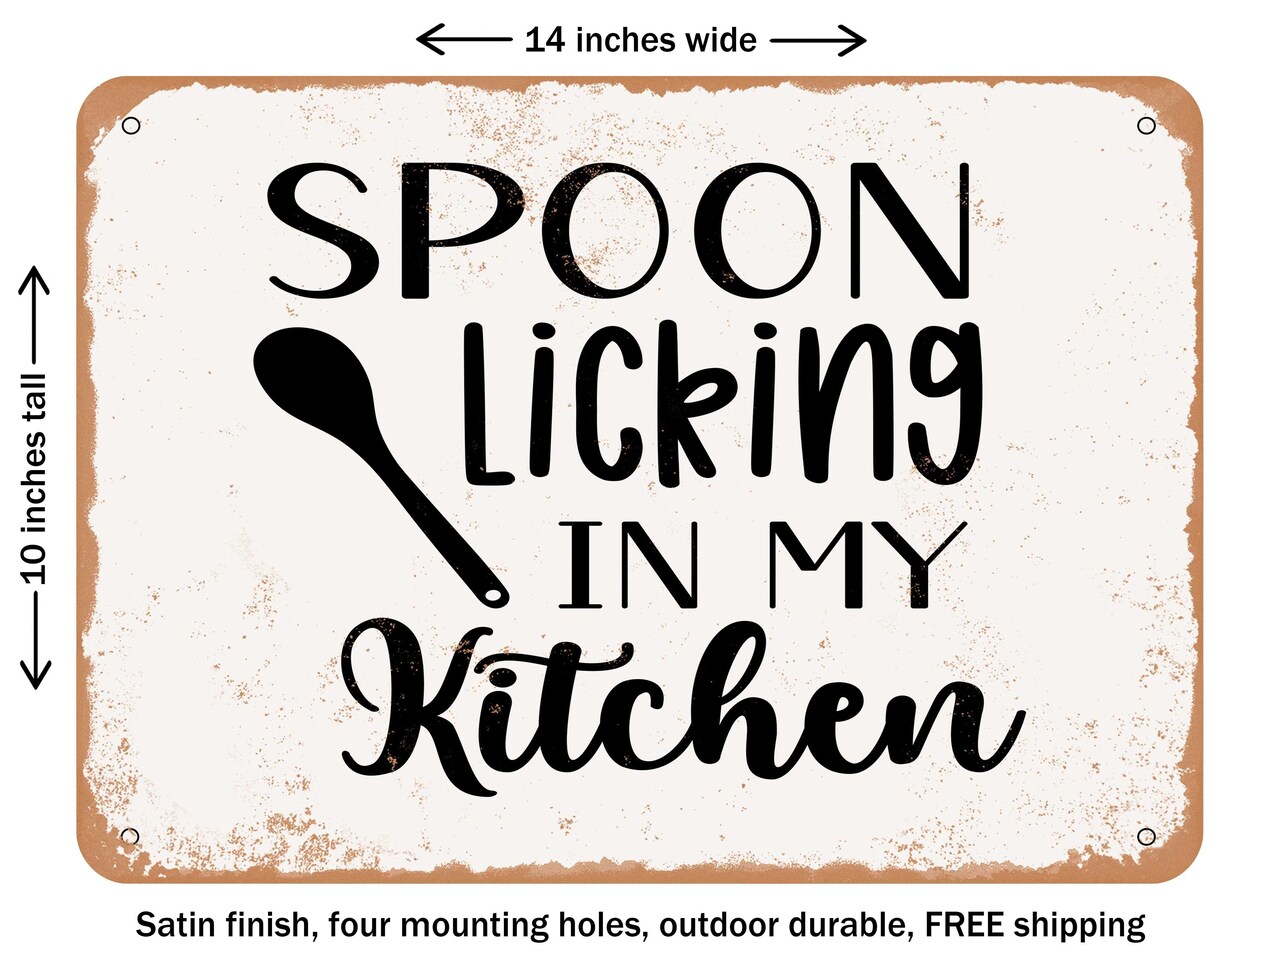 DECORATIVE METAL SIGN - Spoon Licking In My Kitchen - Vintage Rusty Look